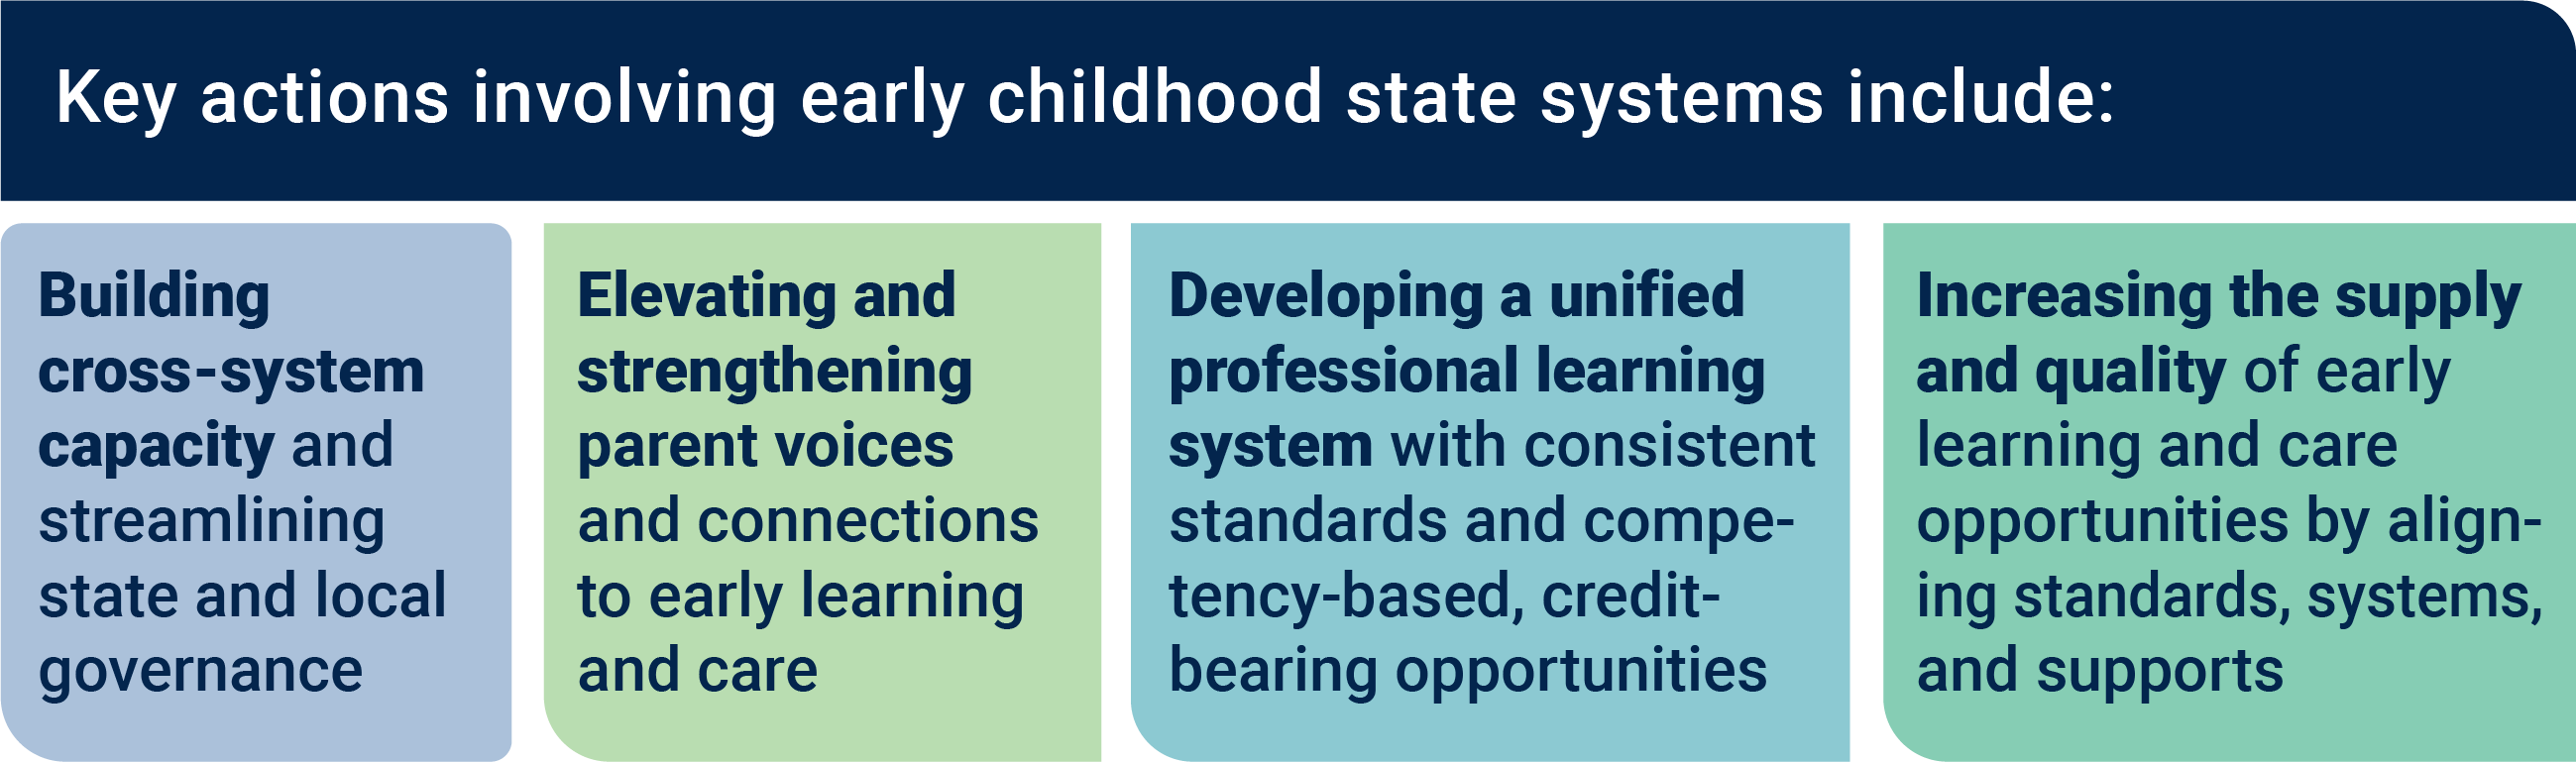 Key actions involving equity-based early childhood state systems